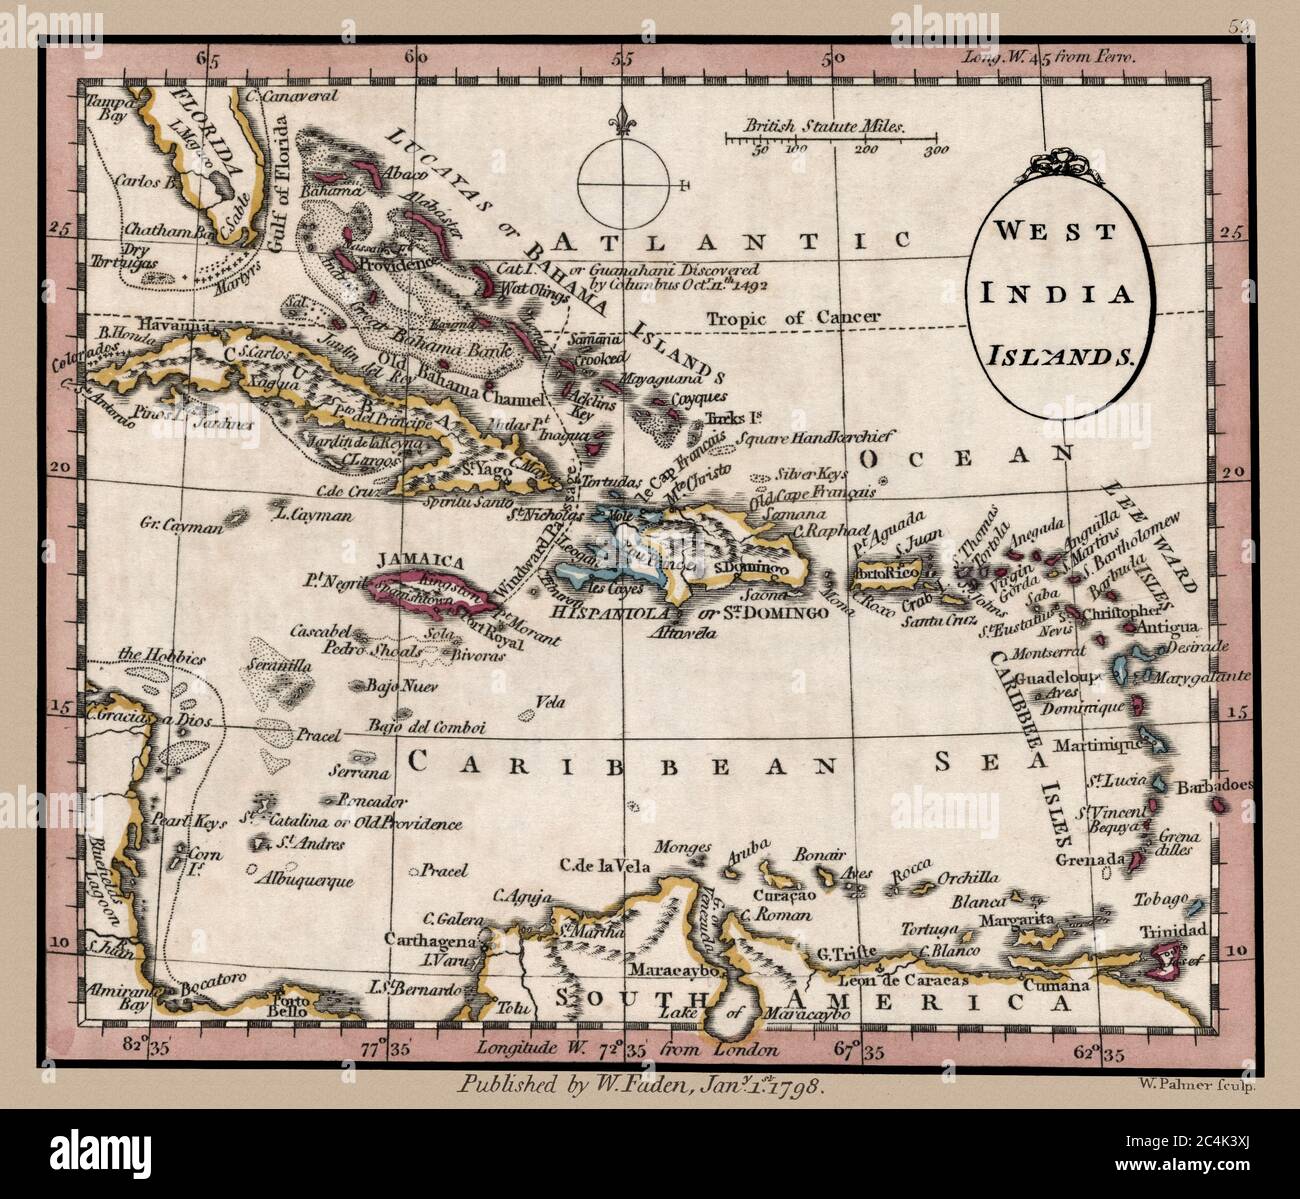 'West India Islands.' Map shows islands and important landmarks of the Caribbean Sea. This is a beautifully detailed historic map reproduction. Original from a British atlas published by famed cartographer William Faden was created circa 1798. Stock Photo